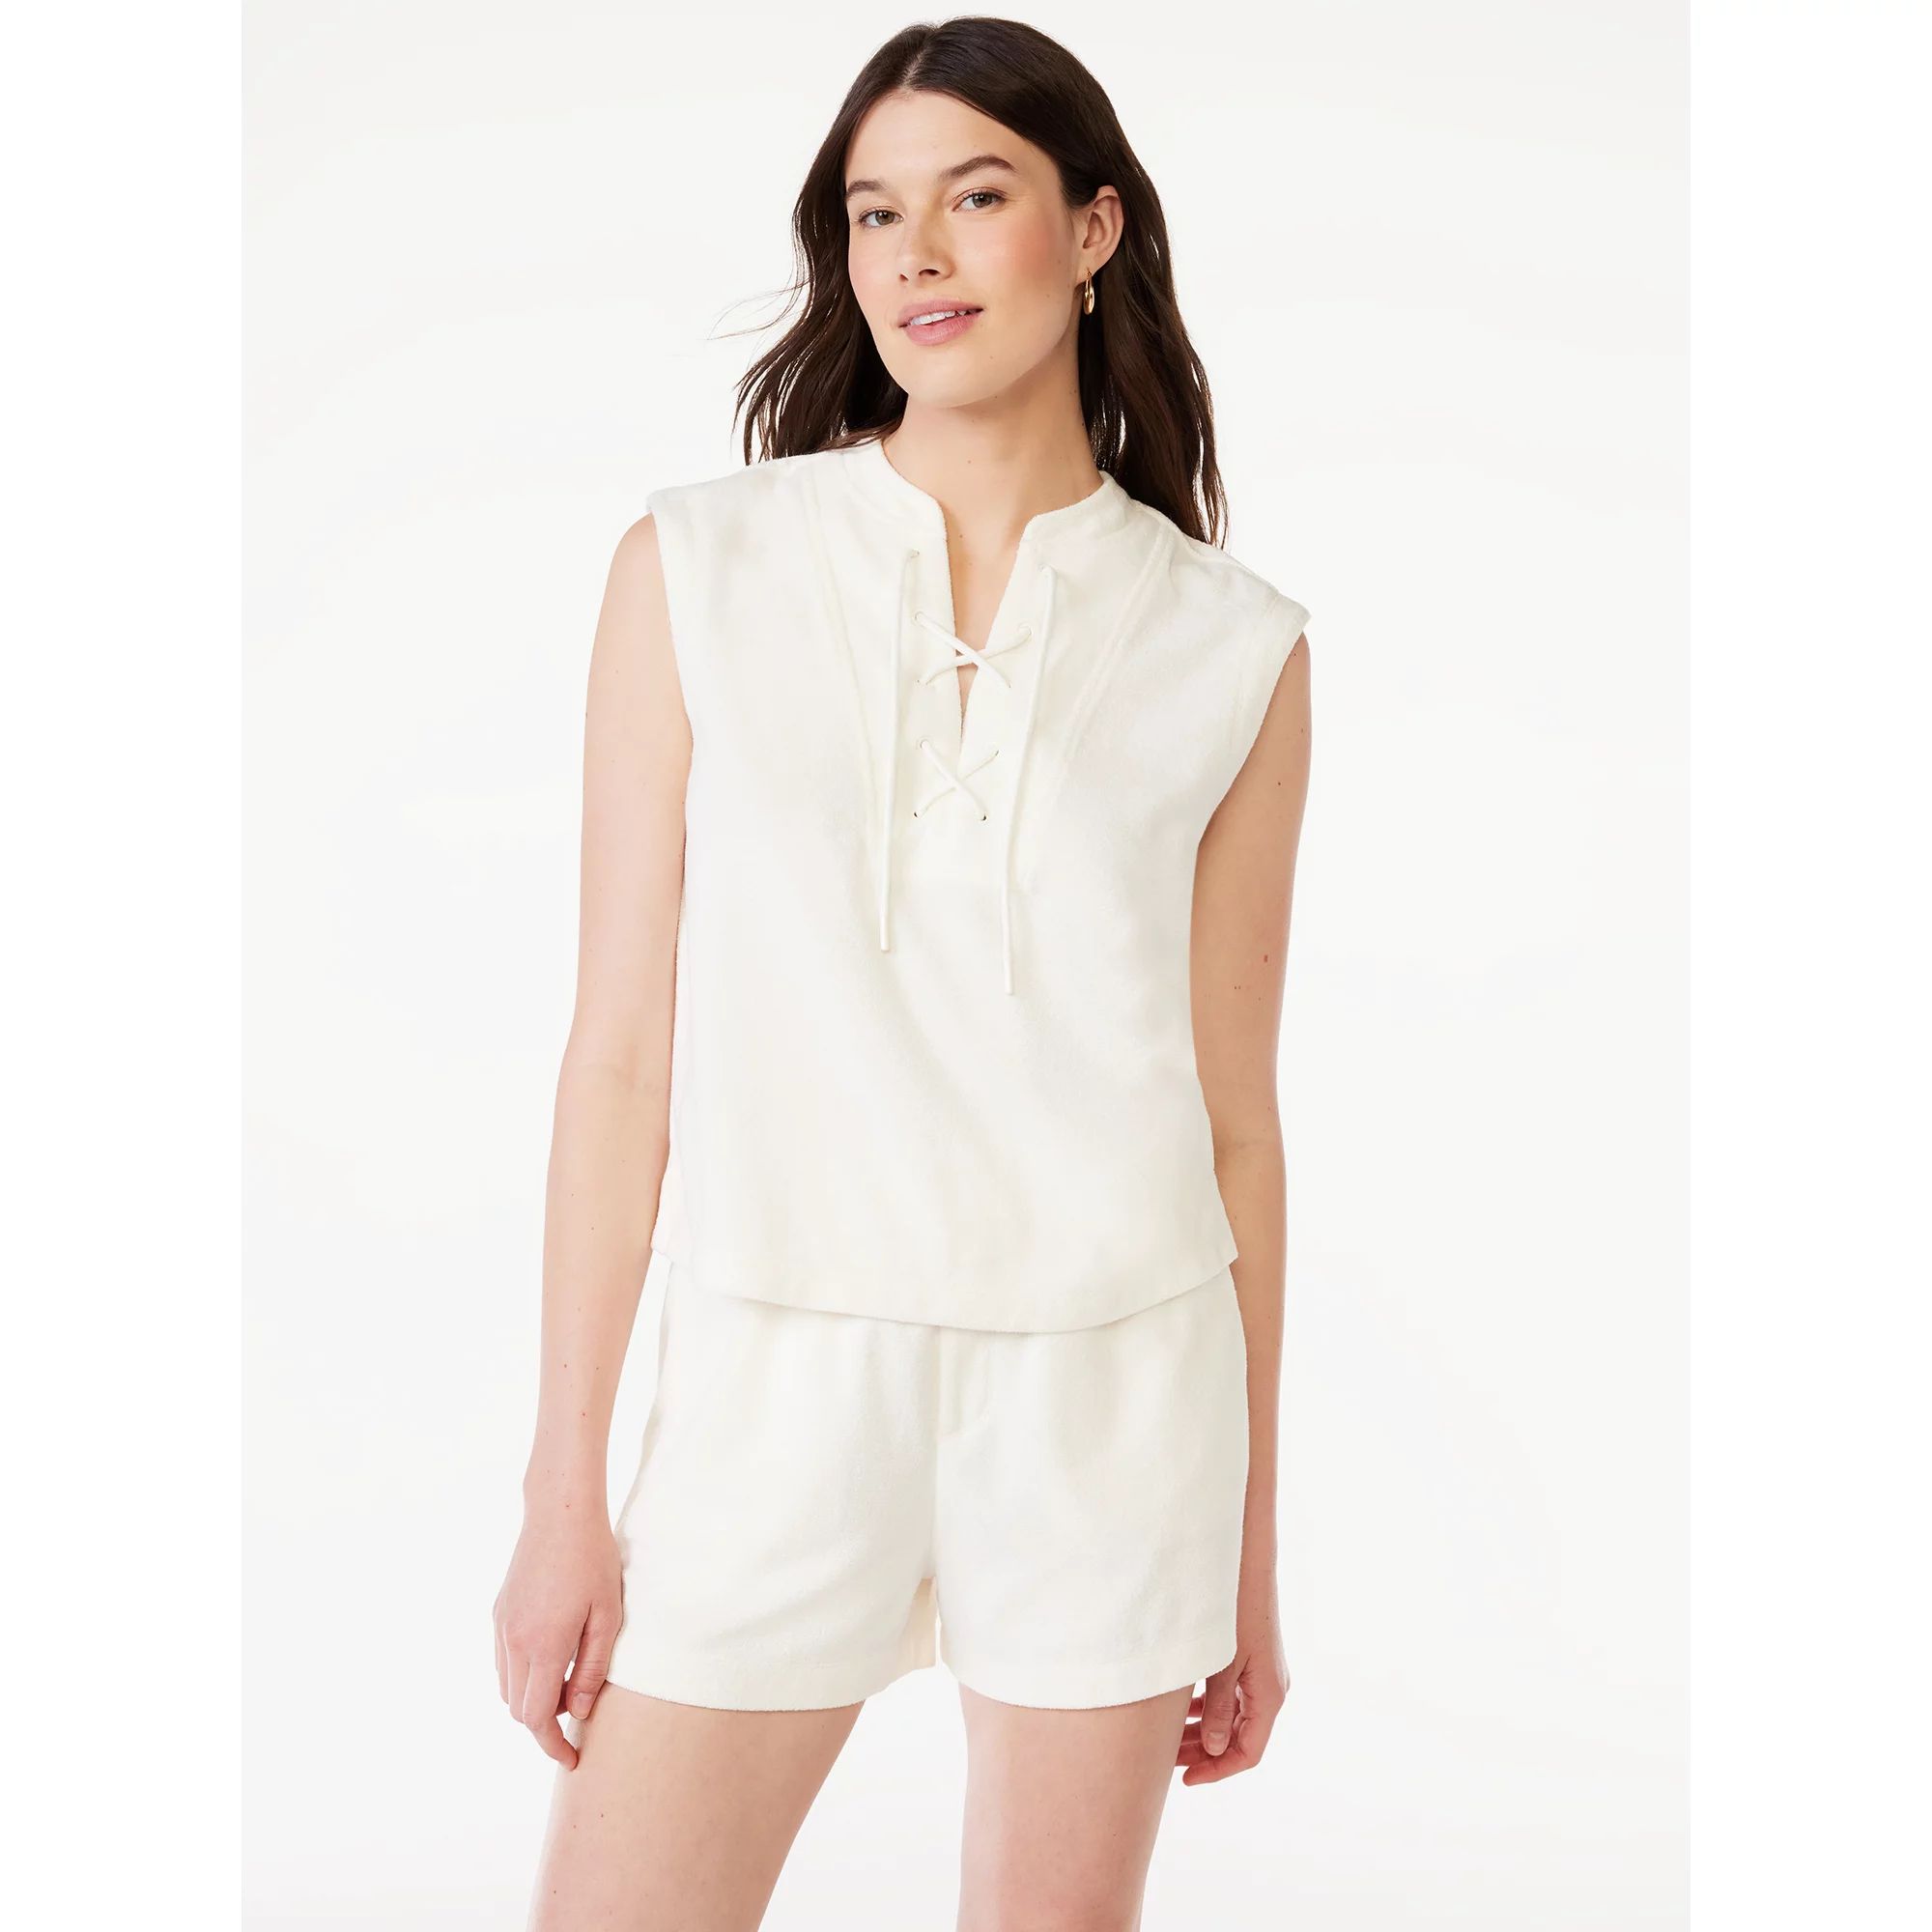 Free Assembly Women's Sleeveless Terry Cloth Lace Up Top, Sizes XS-XL | Walmart (US)